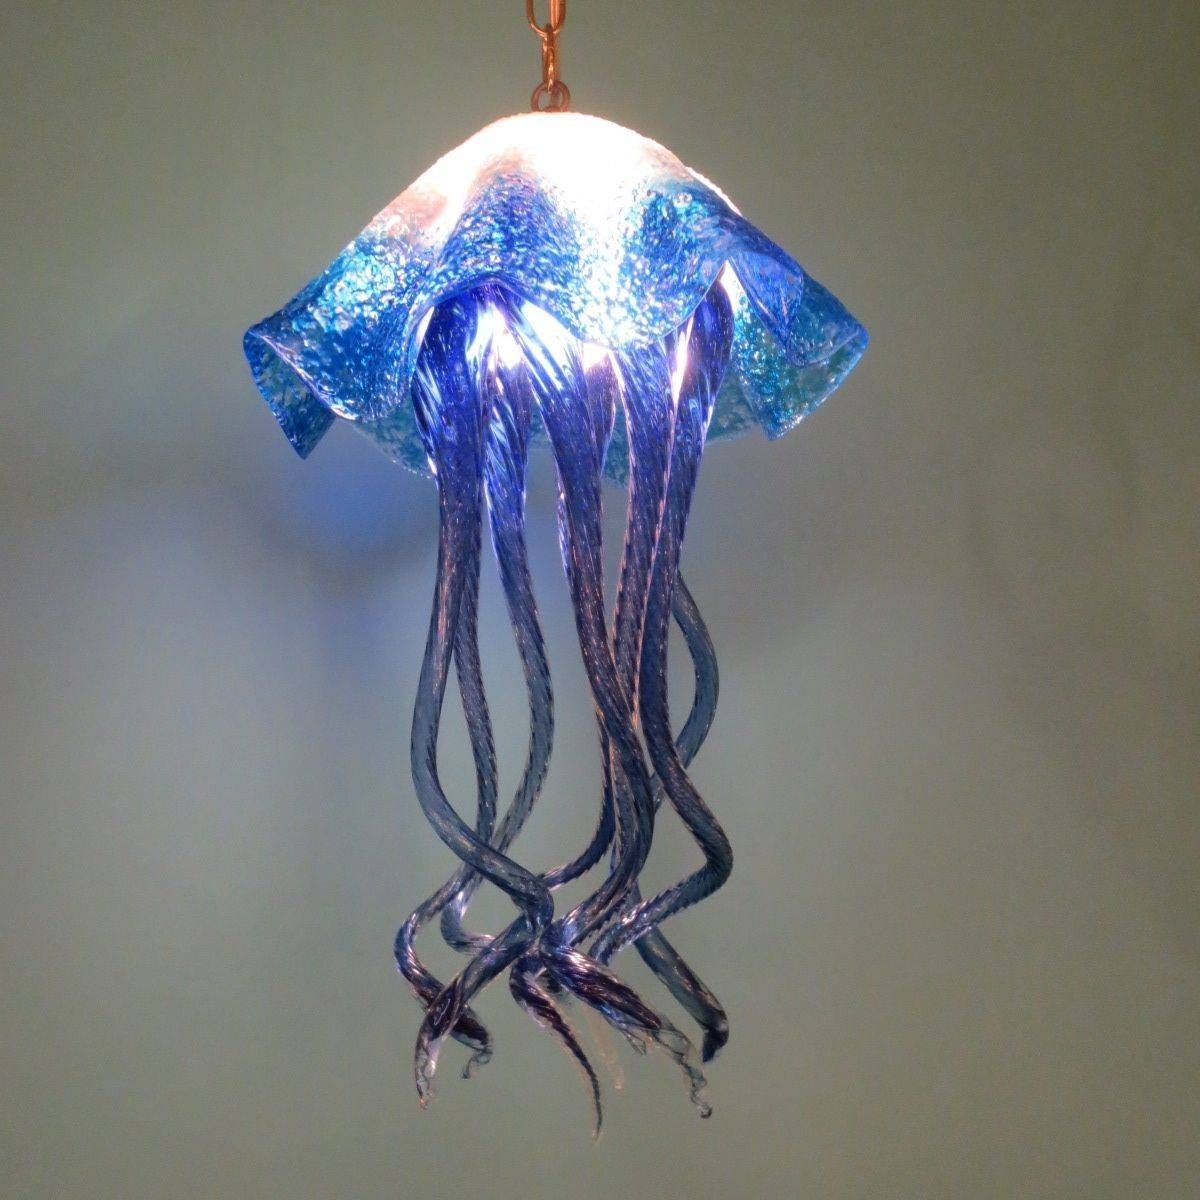 Buy A Hand Made Blown Glass Chandelier Jellyfish Light – Art Glass Within Jellyfish Inspired Pendant Lights (View 1 of 15)